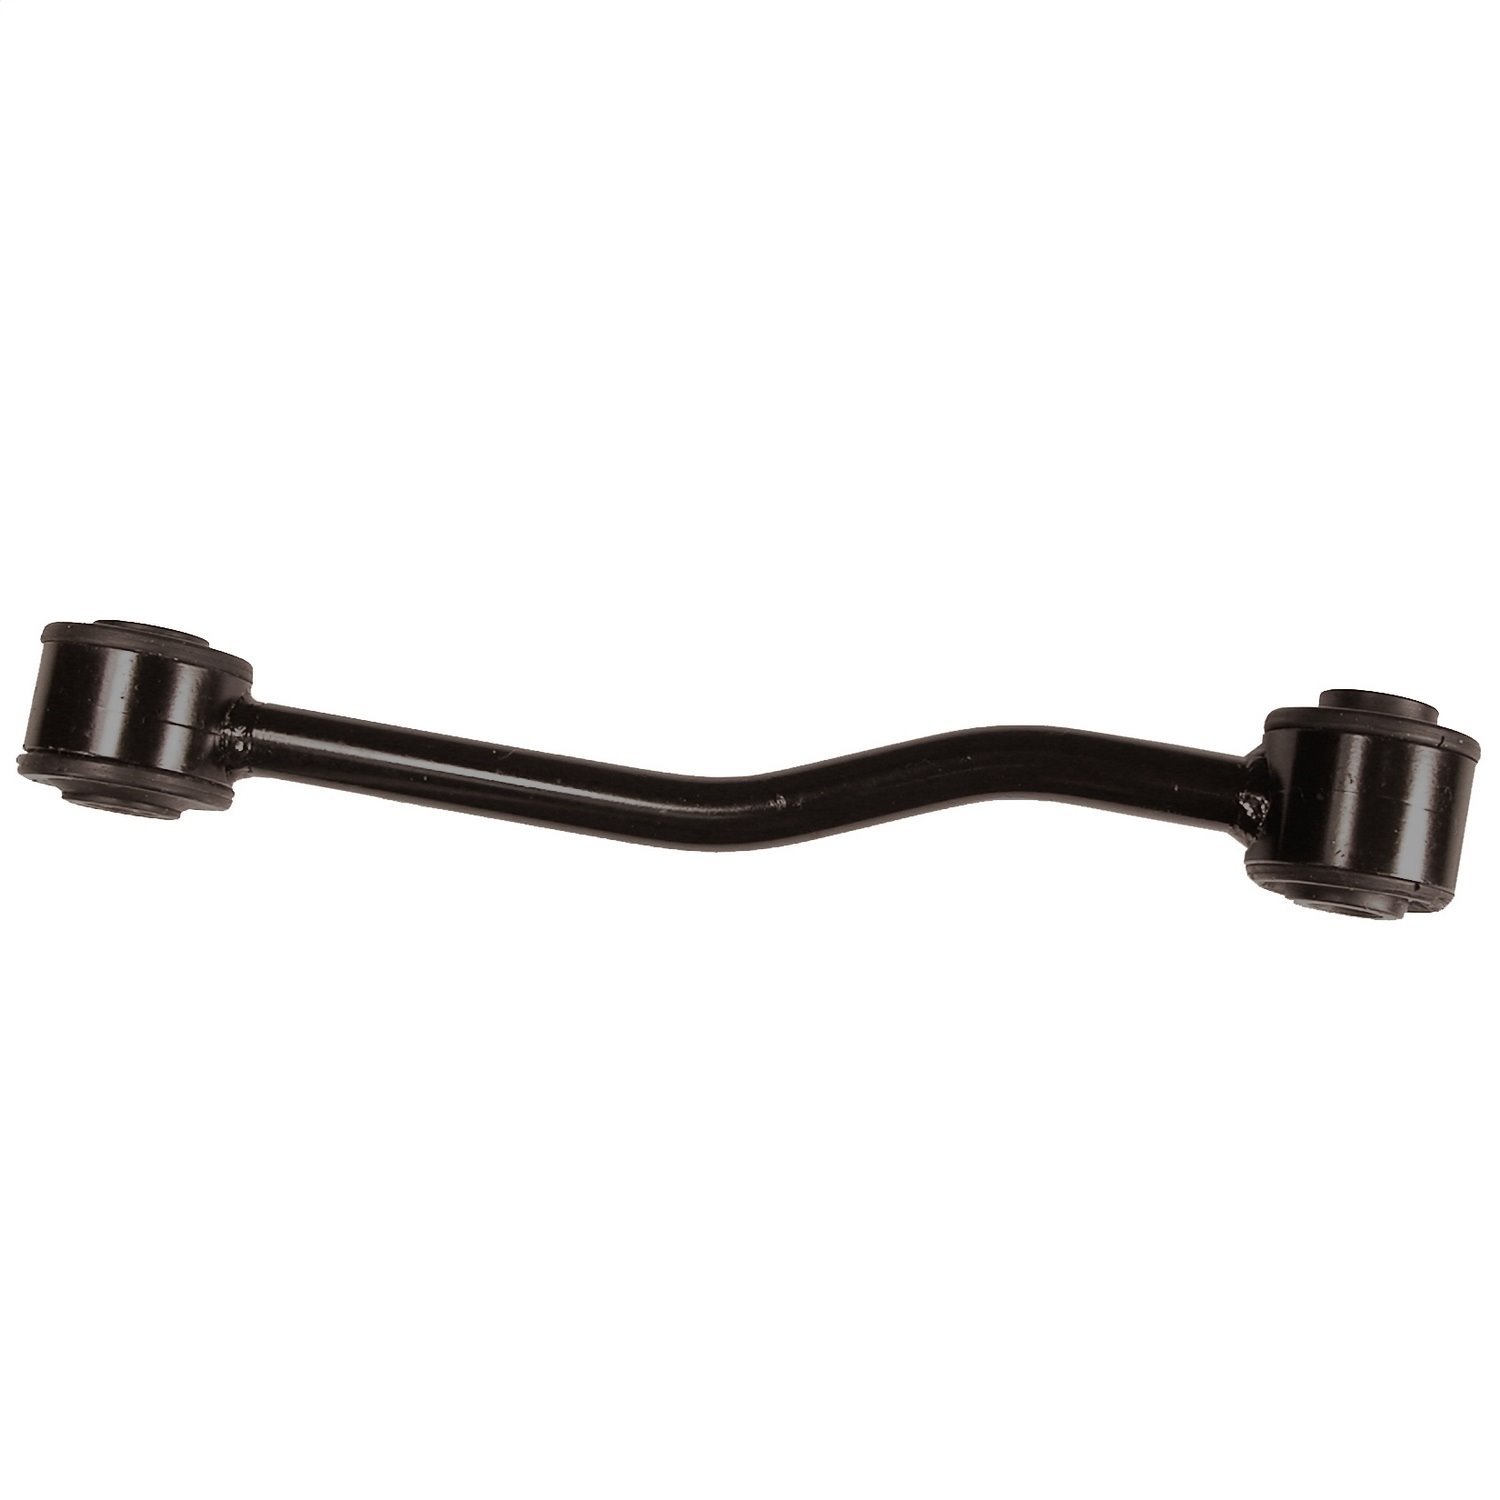 Replacement front sway bar end link from Omix-ADA, Fits 99-04 Jeep Grand Cherokee WJ